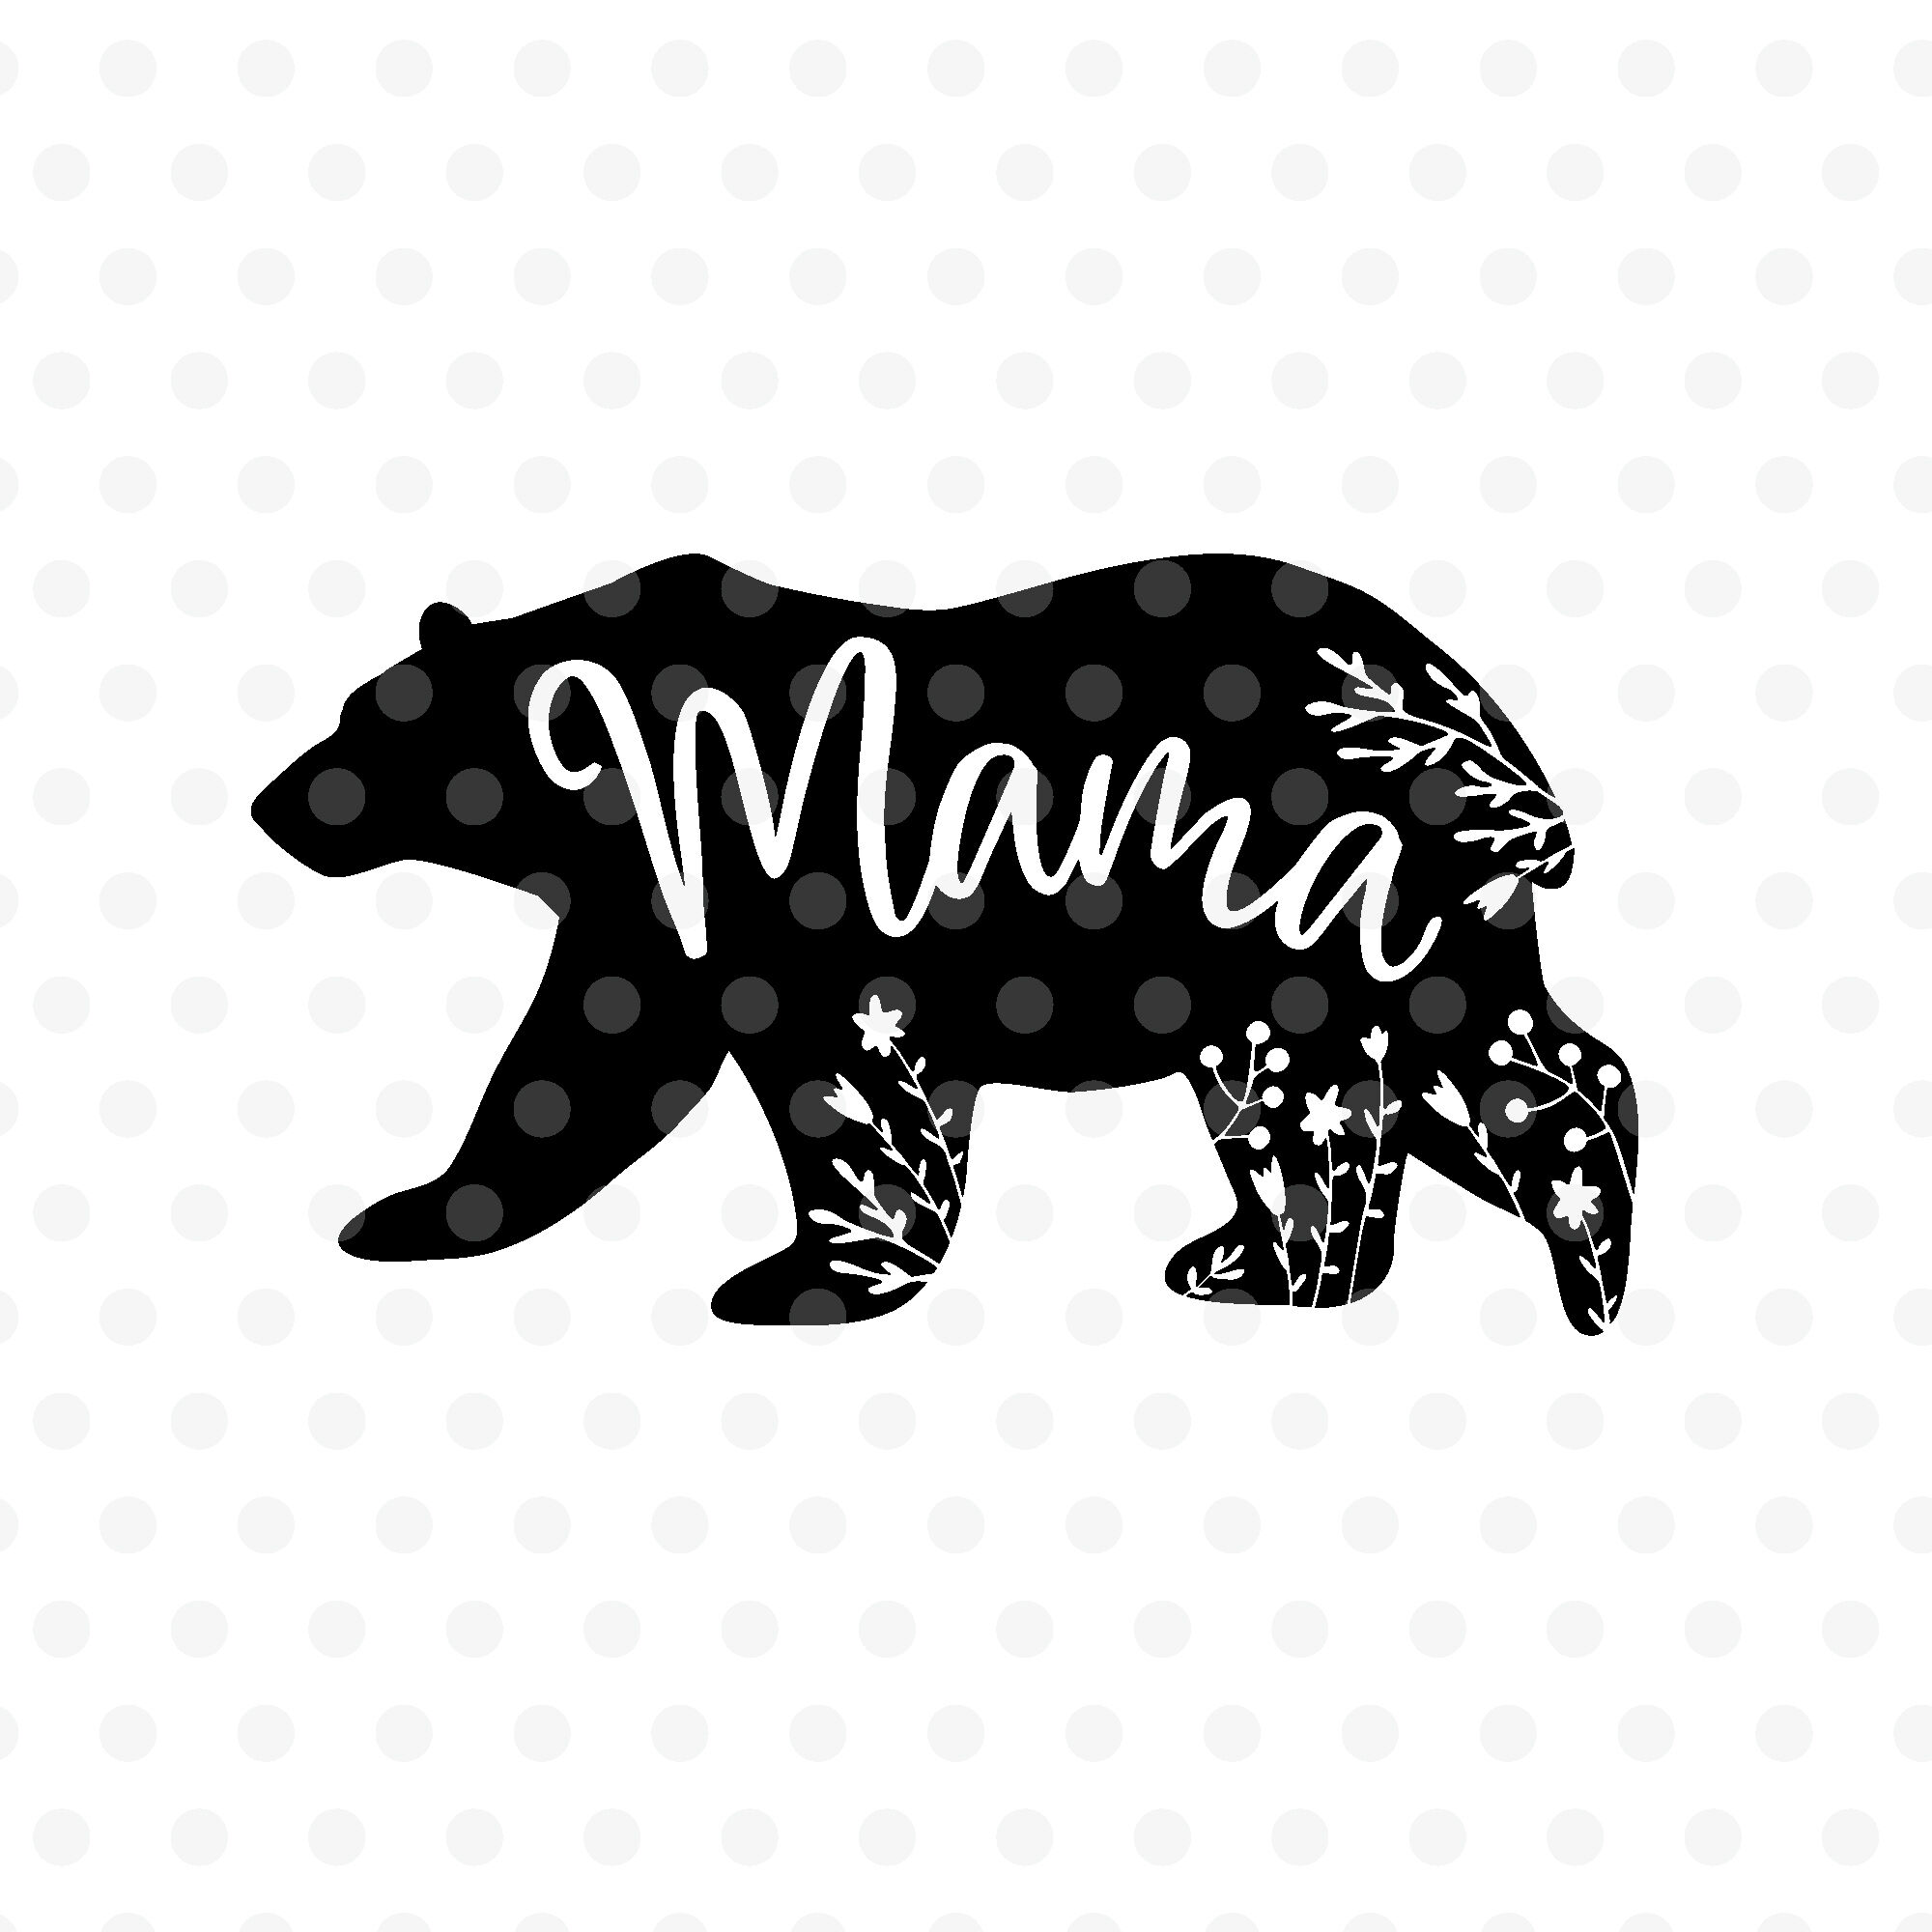 Mama bear , Floral bear SVG, EPS, PNG, DXF By Tabita's shop